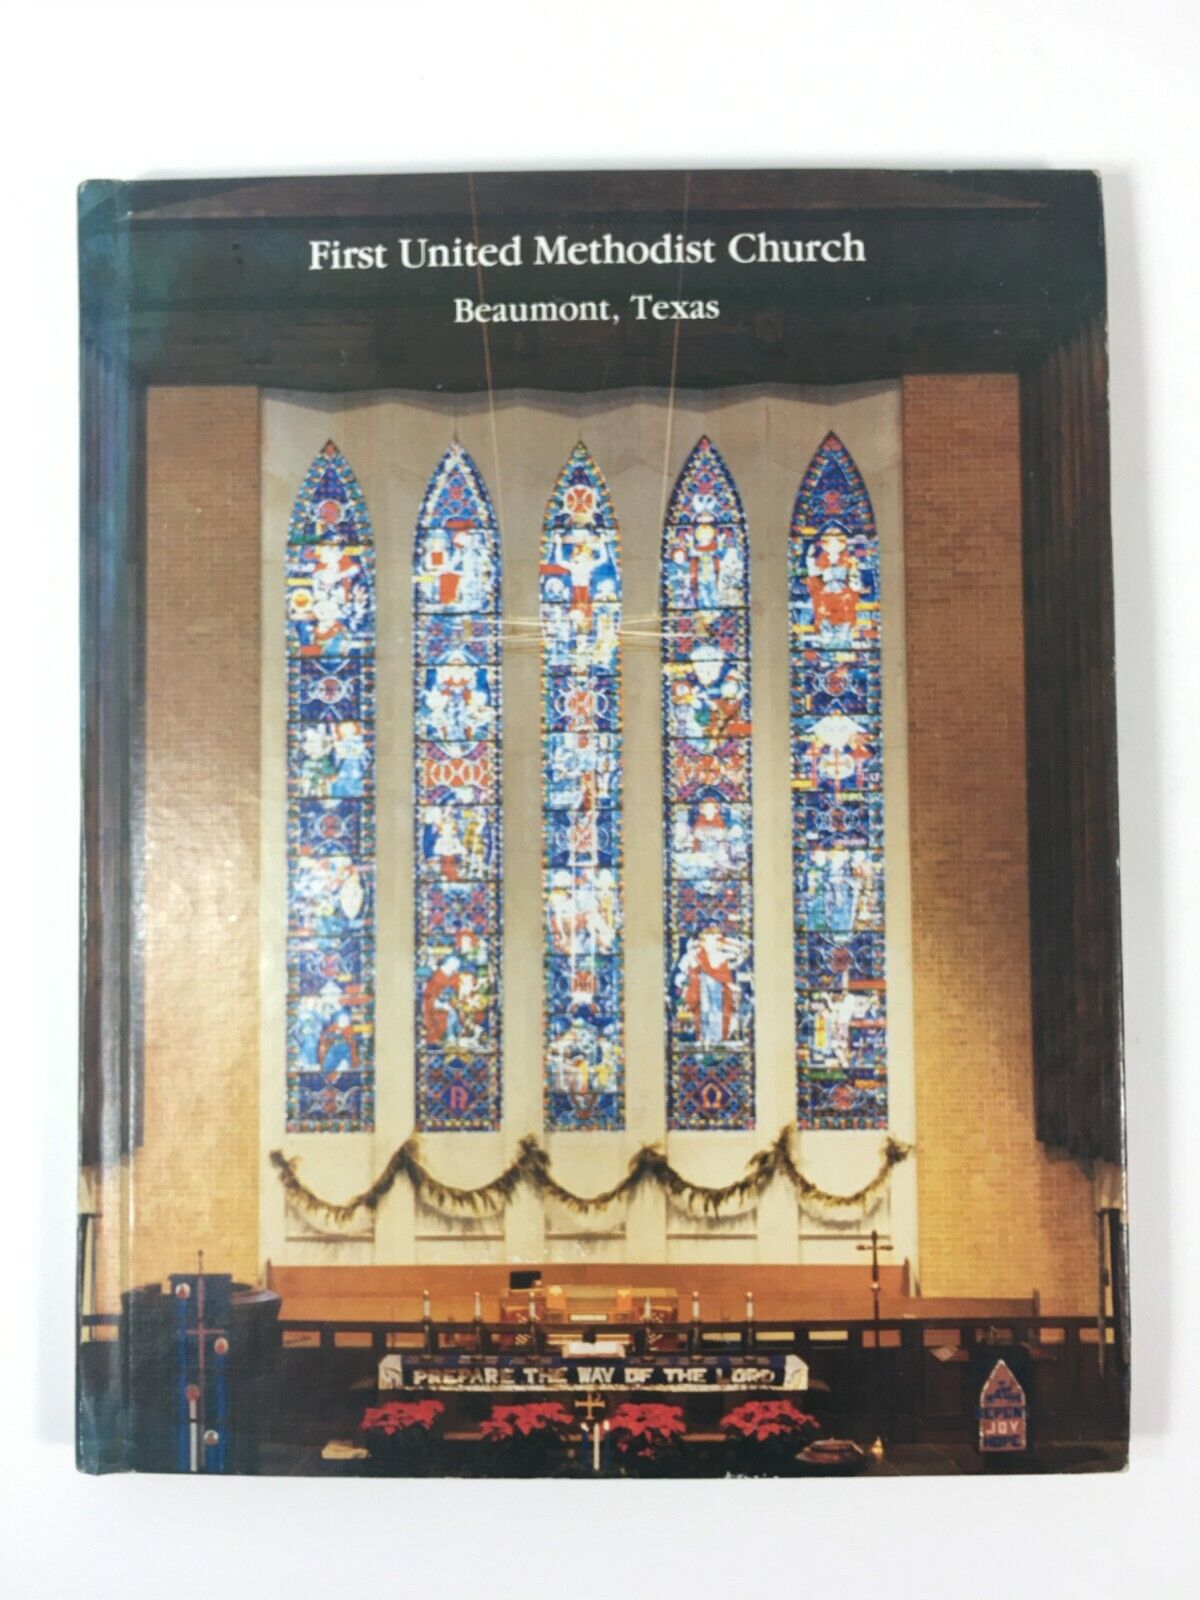 Beaumont Texas First United Methodist Church Directory 1991